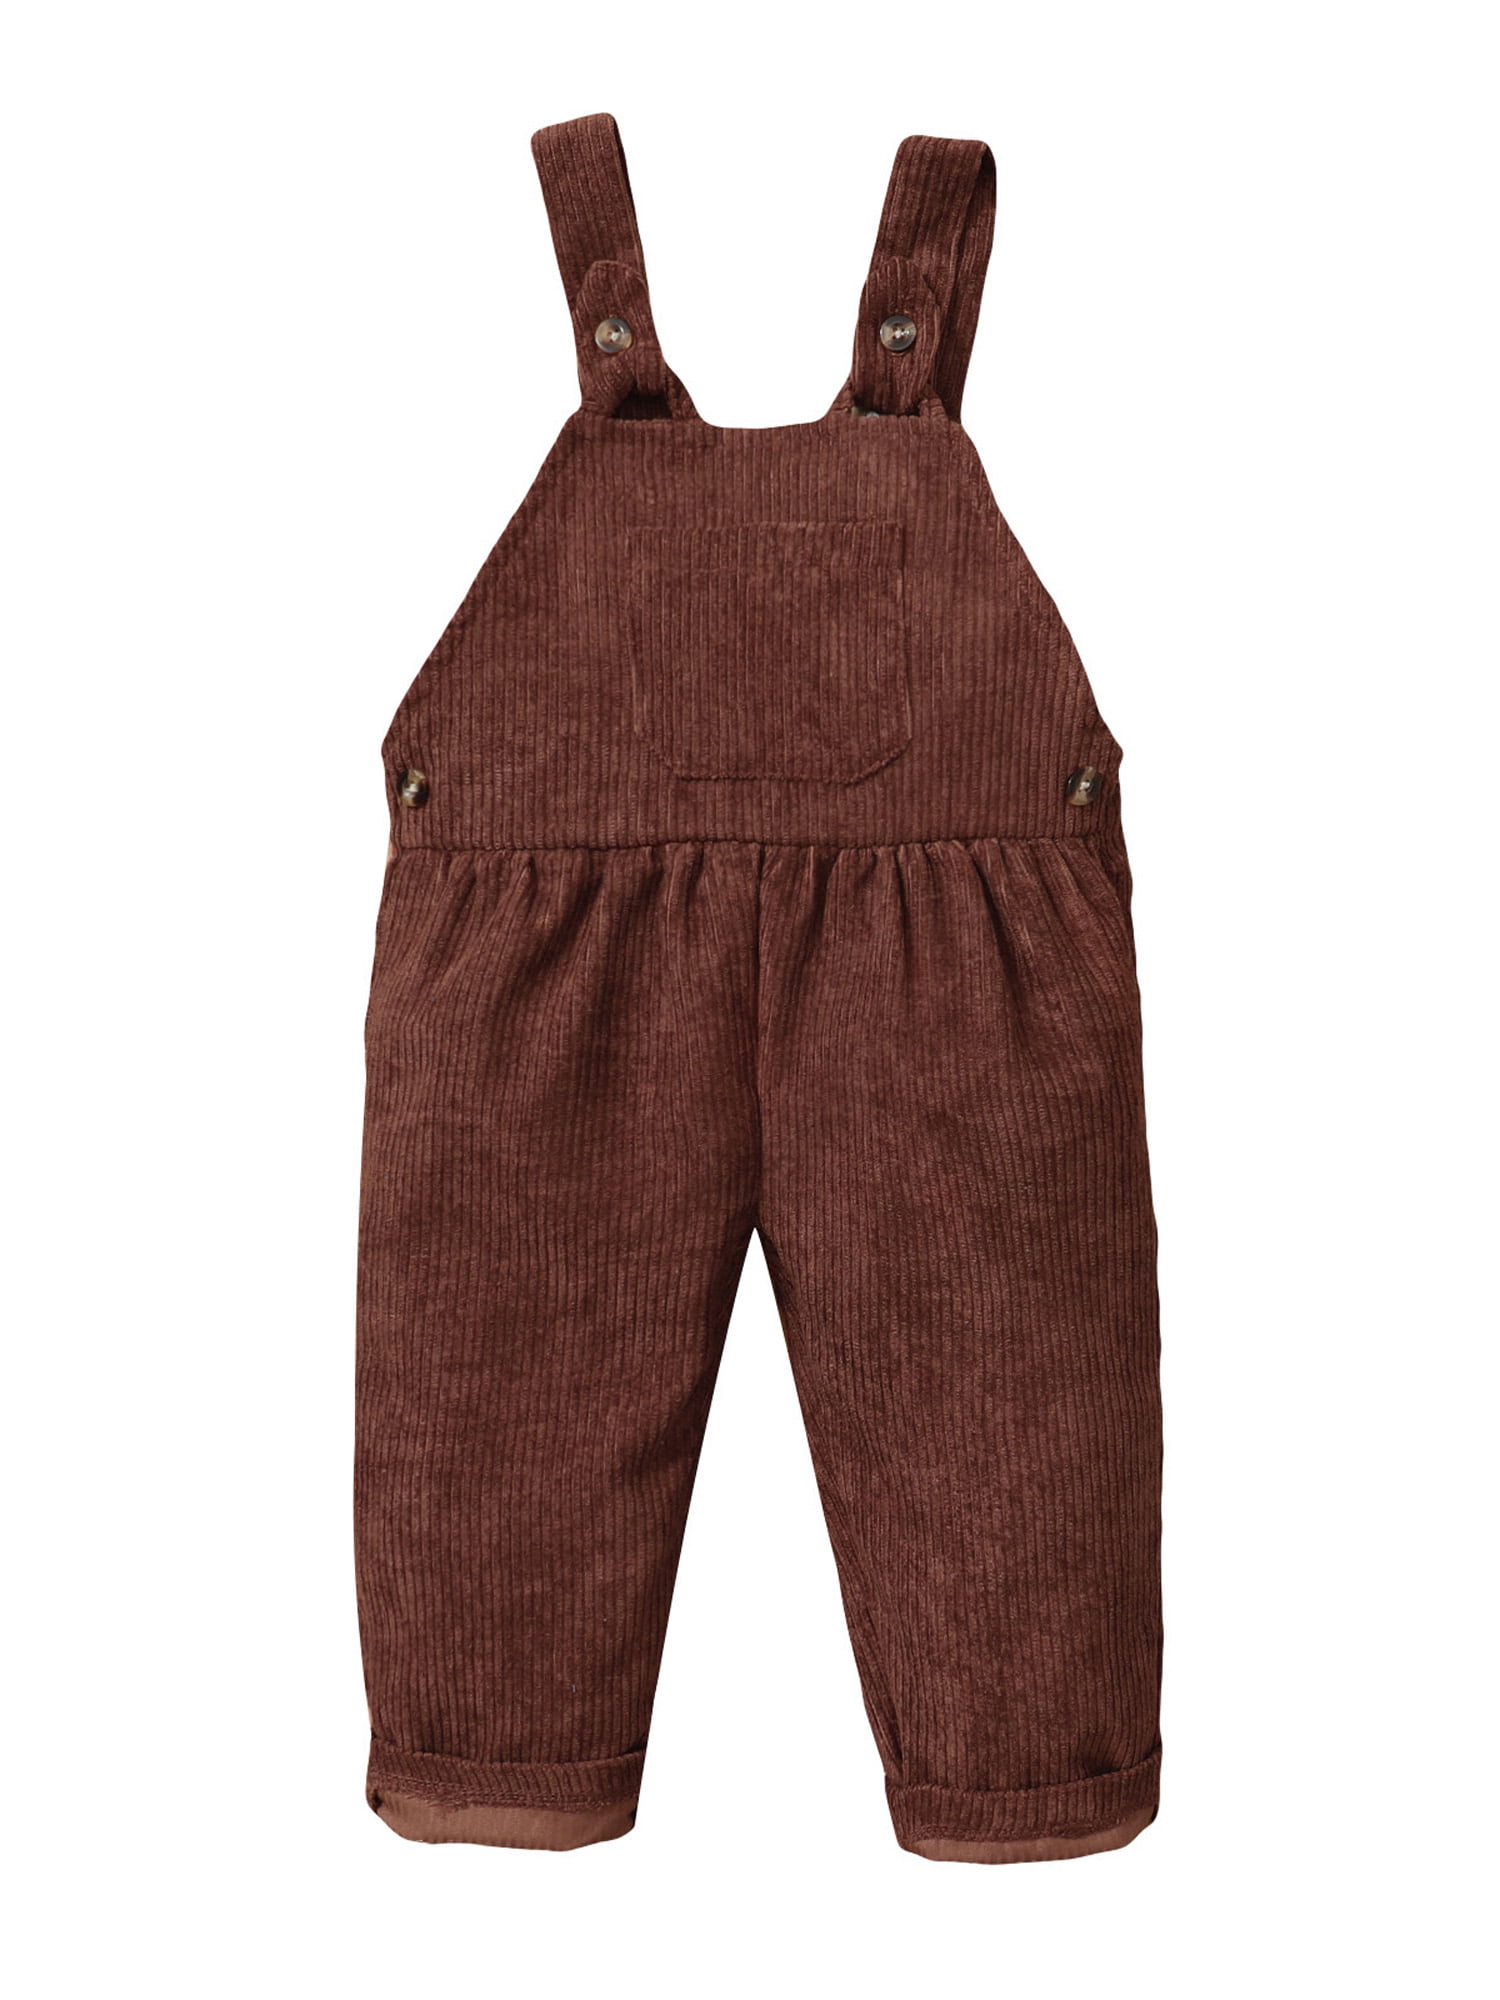 Mango dungaree Brown KIDS FASHION Baby Jumpsuits & Dungarees Corduroy discount 90% 